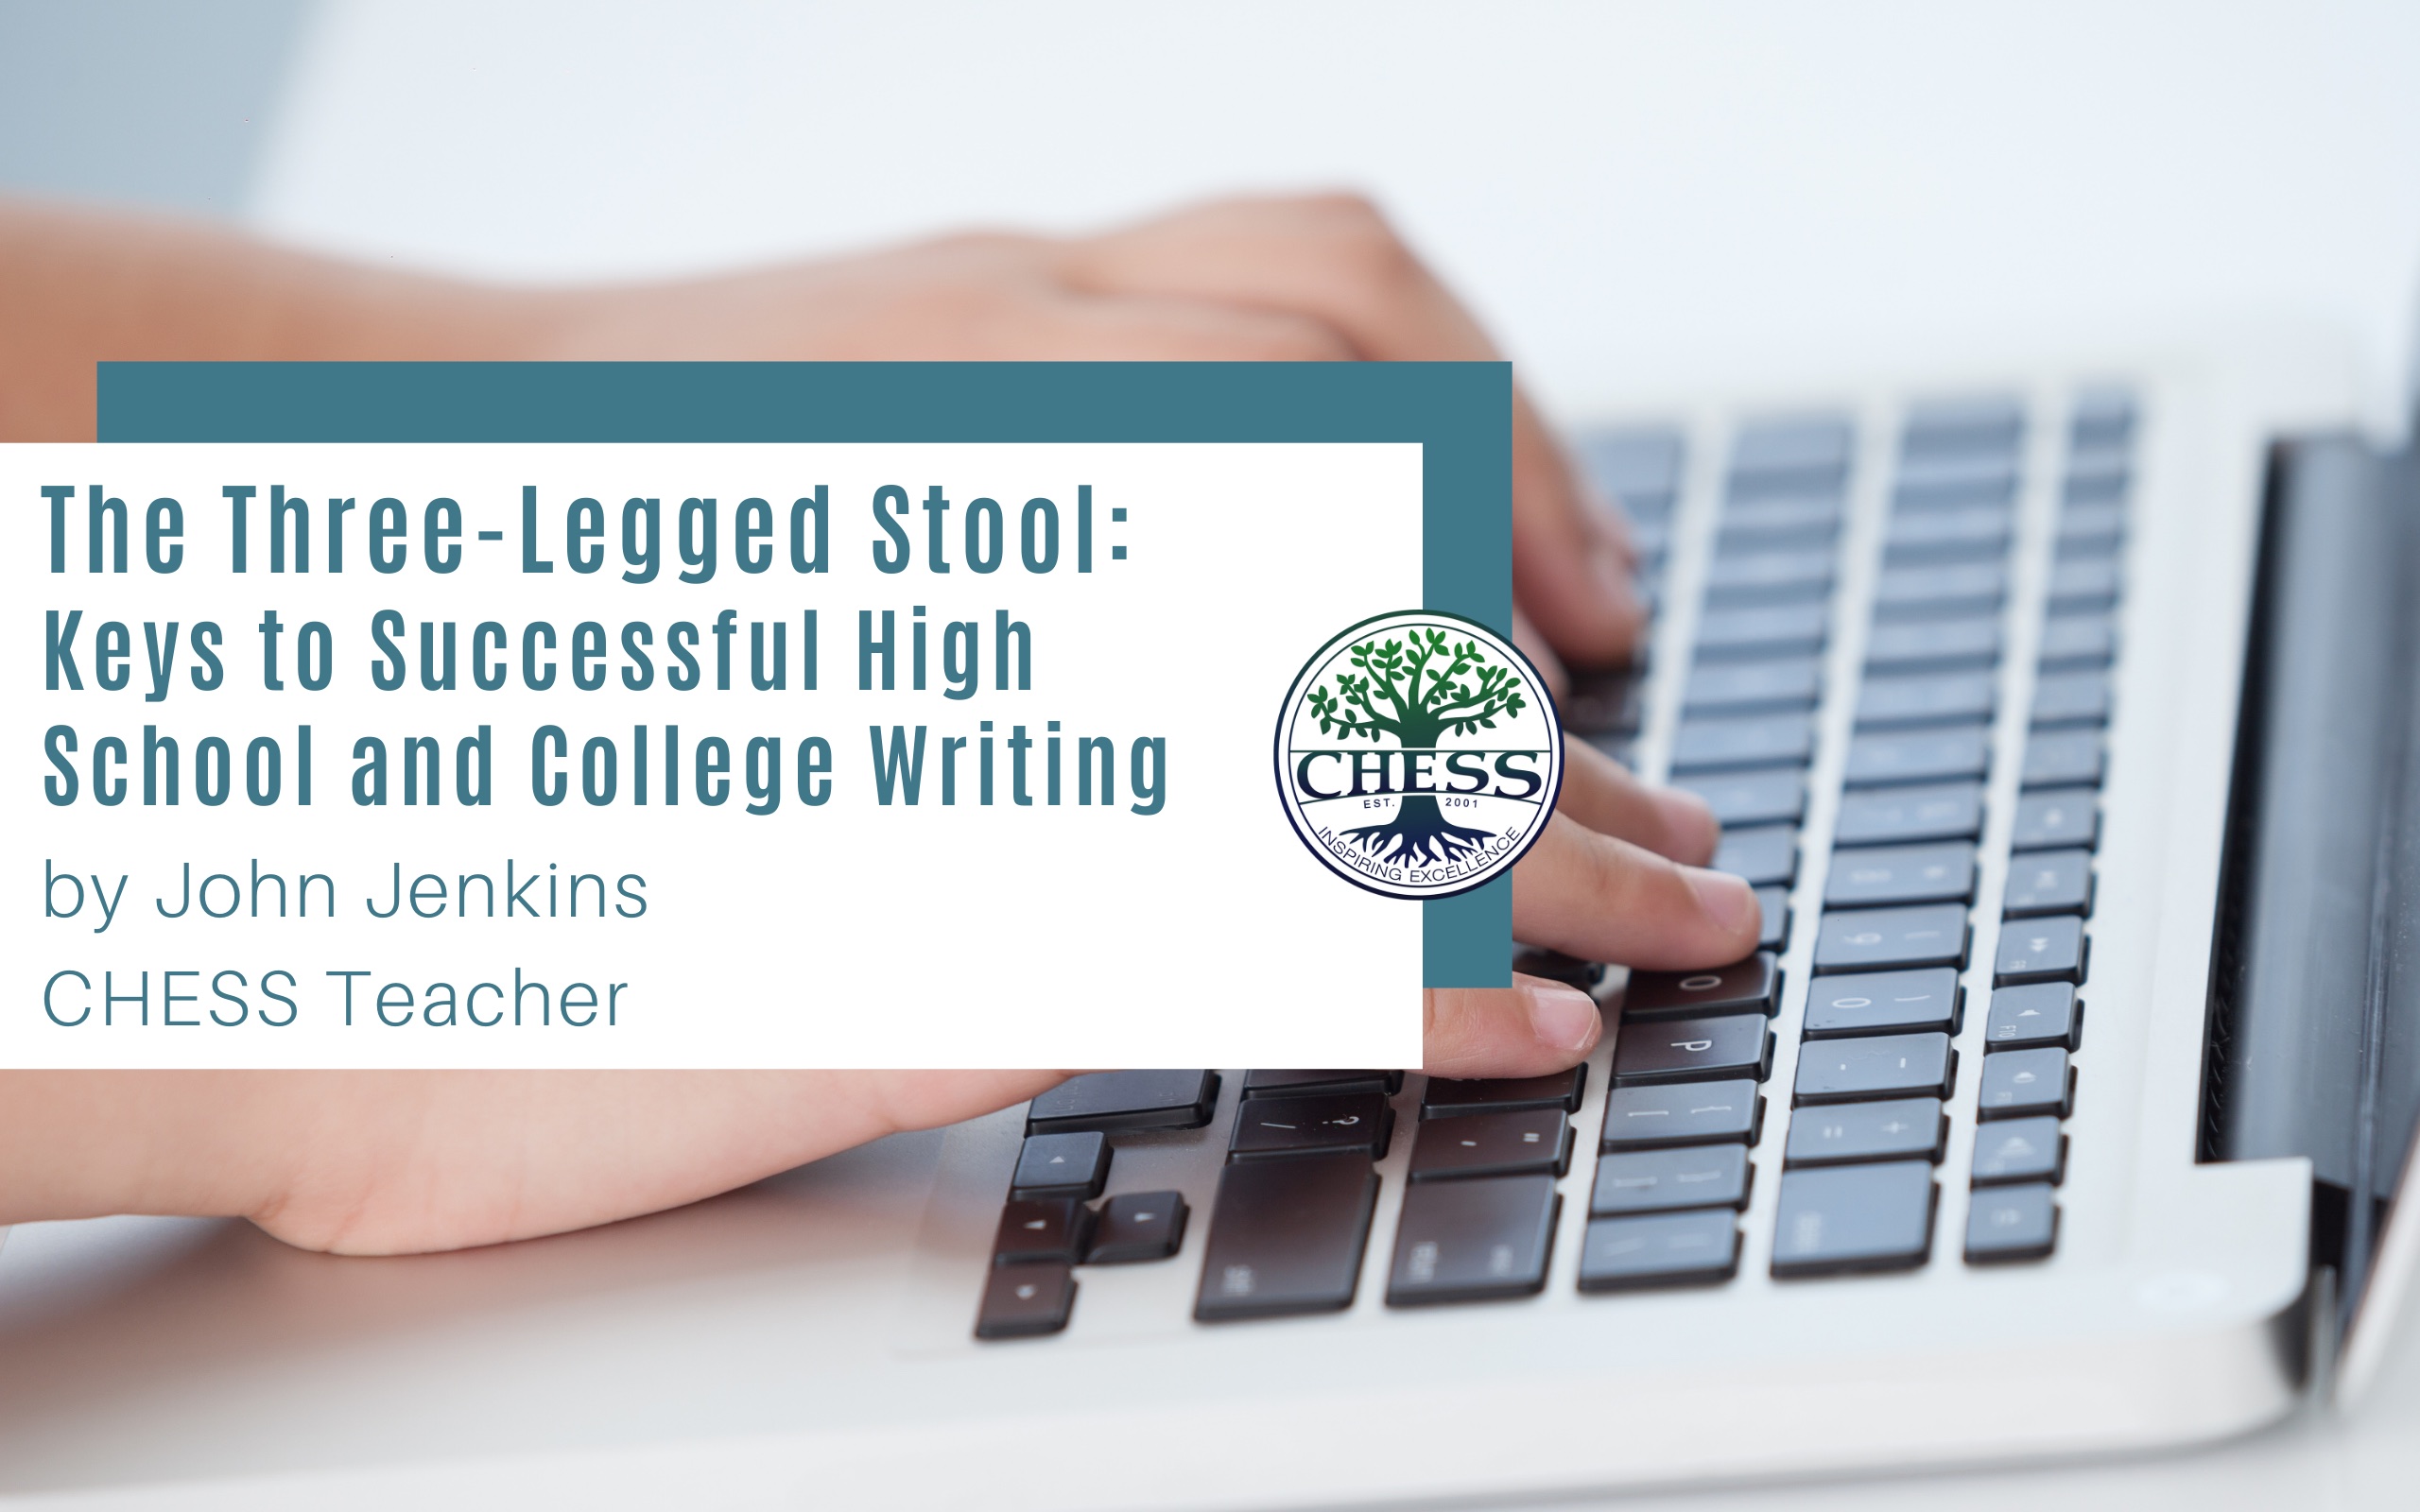 The Three-Legged Stool: Keys to Successful High School and College Writing